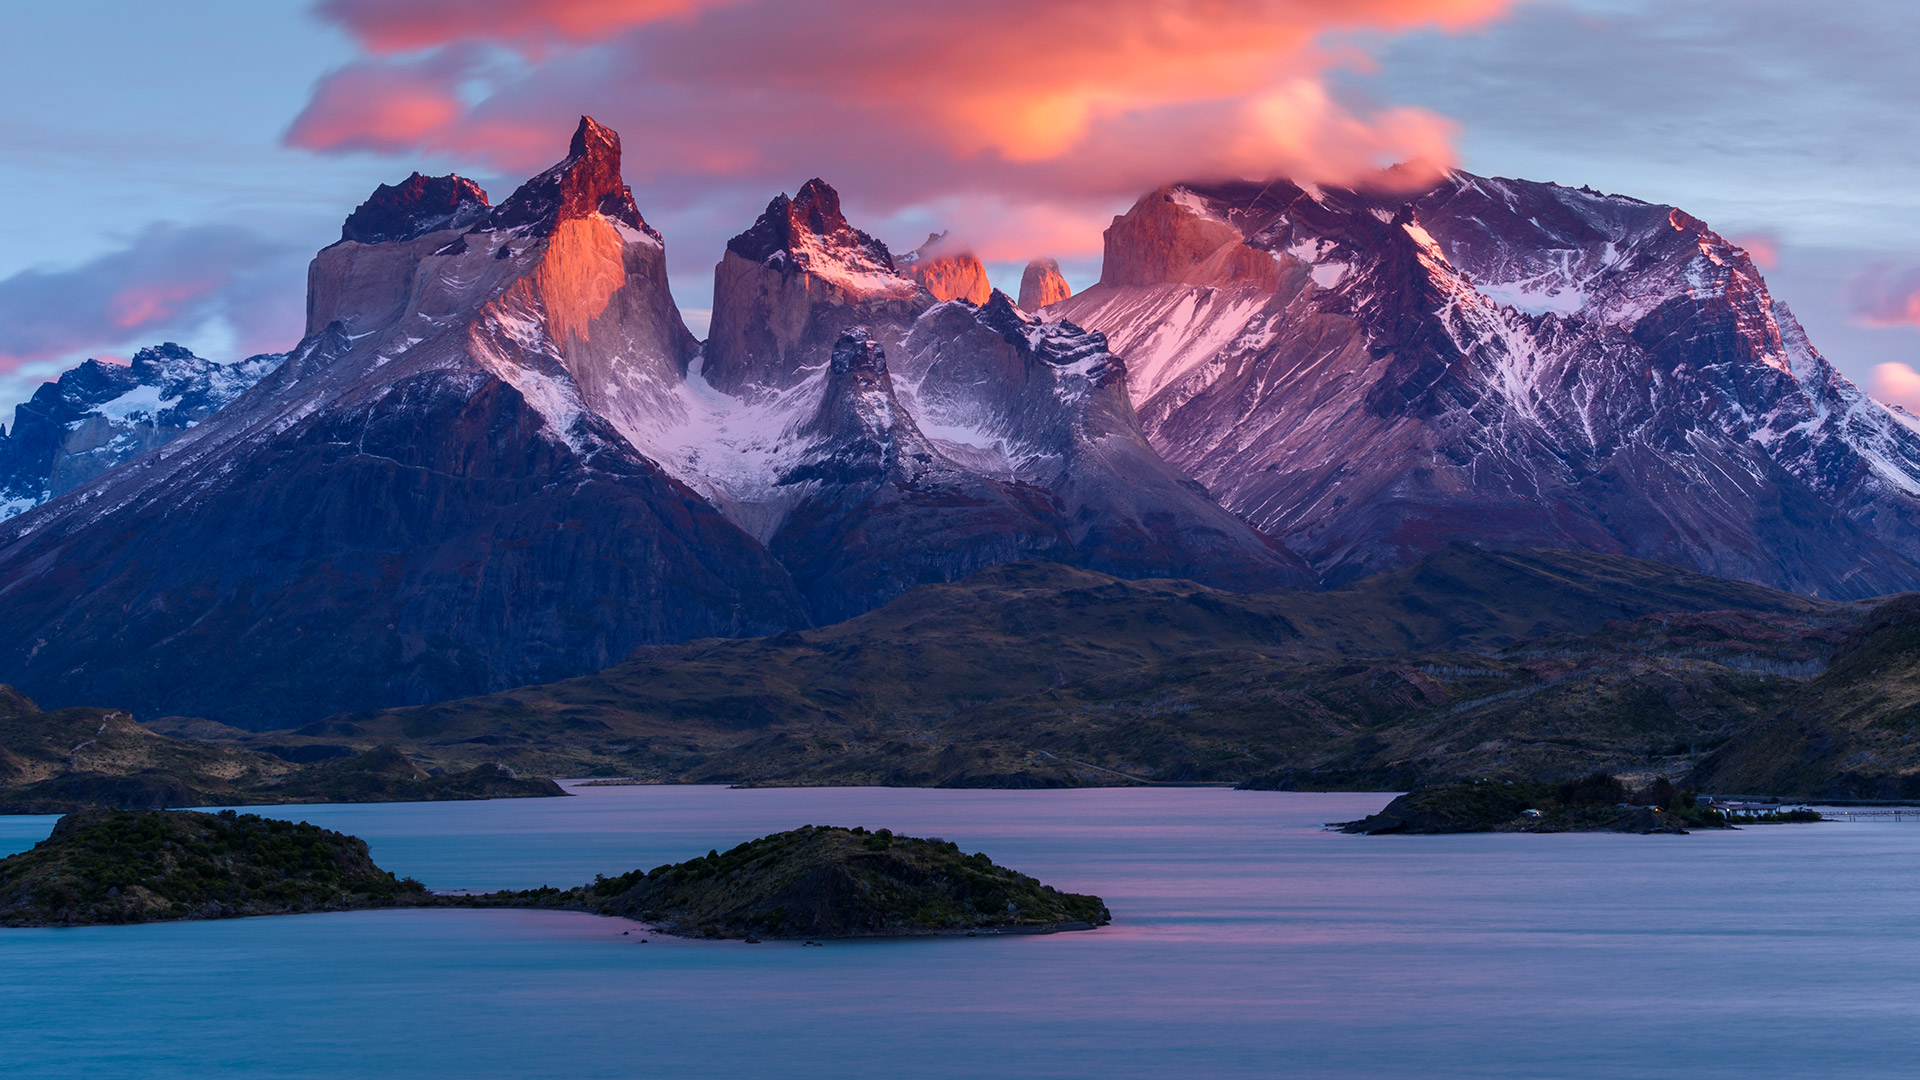 Sunrise on the cuernos in Torres del Paine National Park, Chile